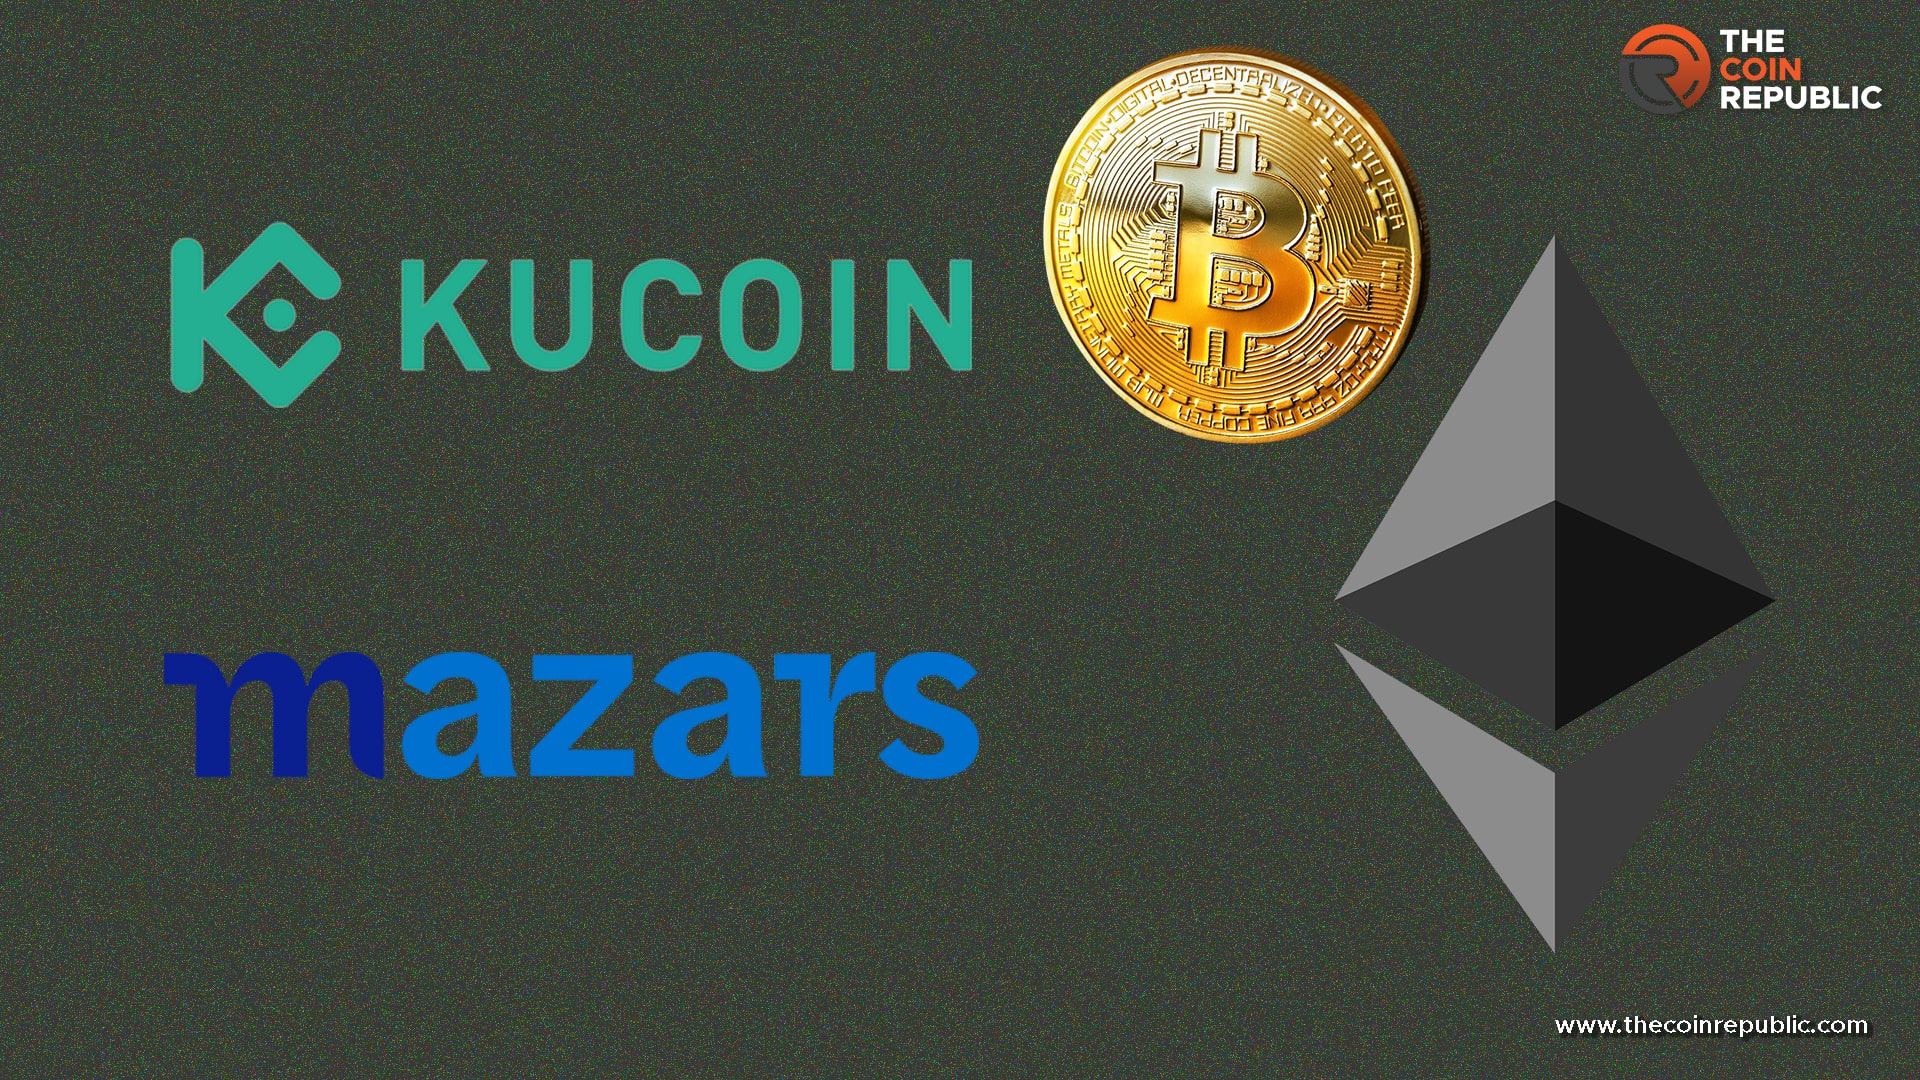 BTC, ETH reserves overcollateralized at KuCoin: Mazars.